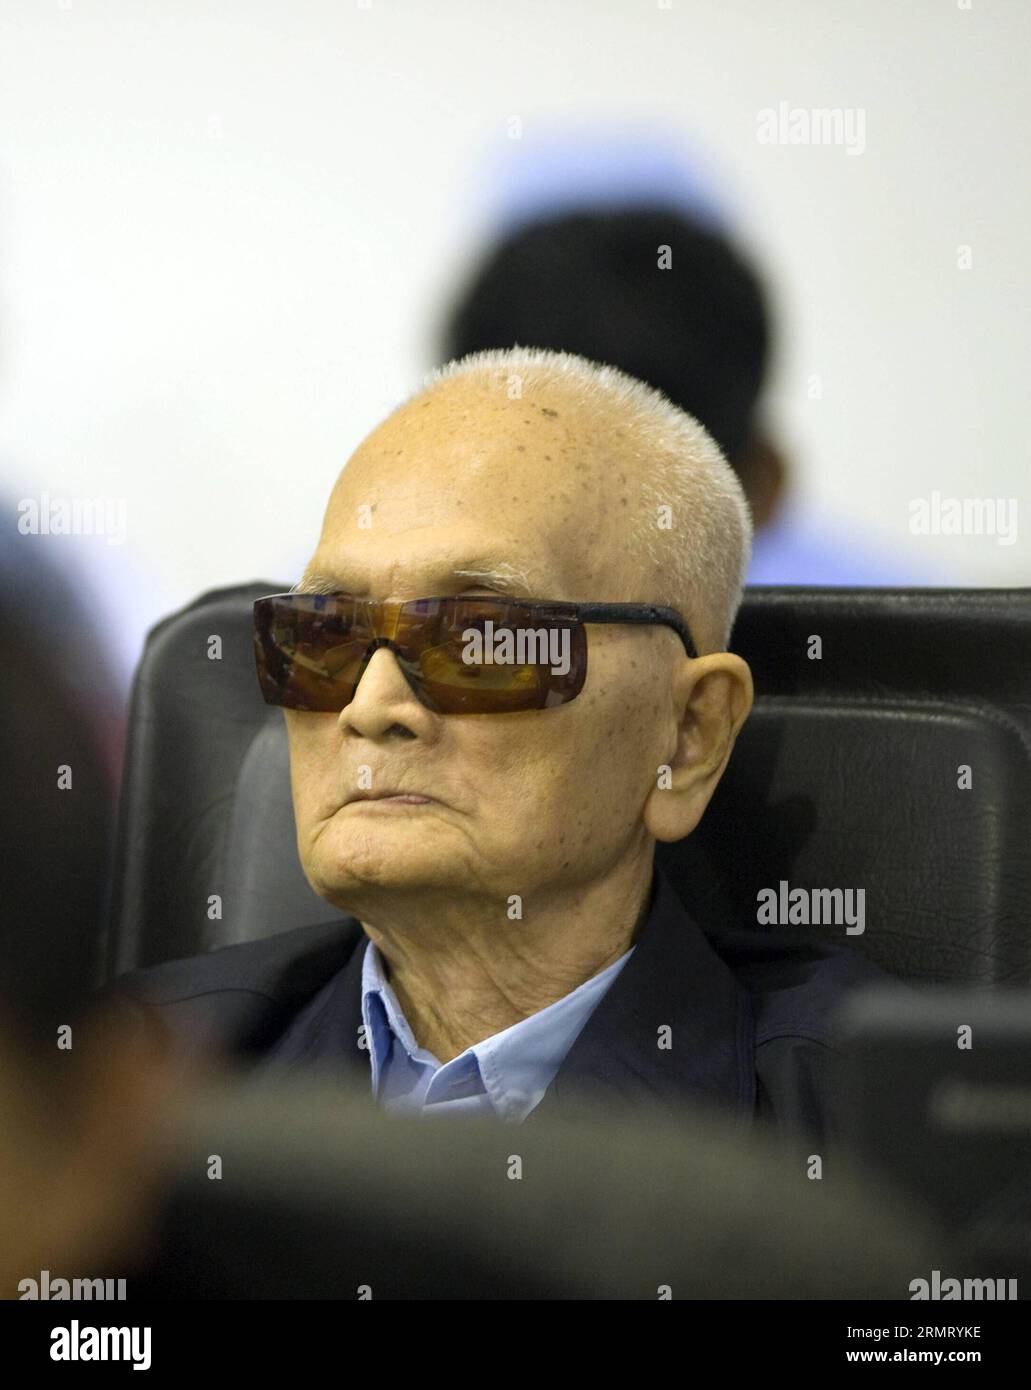 (140807) -- PHNOM PENH, Aug. 7, 2014 -- Nuon Chea, 88, the chief ideologue of the Communist Party of Kampuchea, appears in the courtroom in Phnom Penh, Cambodia, Aug. 7, 2014. The United Nations war crimes tribunal convicted two aging former top leaders of the Democratic Kampuchea, also known as Khmer Rouge, of atrocity crimes against humanity and sentenced them to life in prison, according to a verdict pronounced by the tribunal s president Nil Nonn on Thursday. ) CAMBODIA-PHNOM PENH-VERDICT ECCC PUBLICATIONxNOTxINxCHN Stock Photo